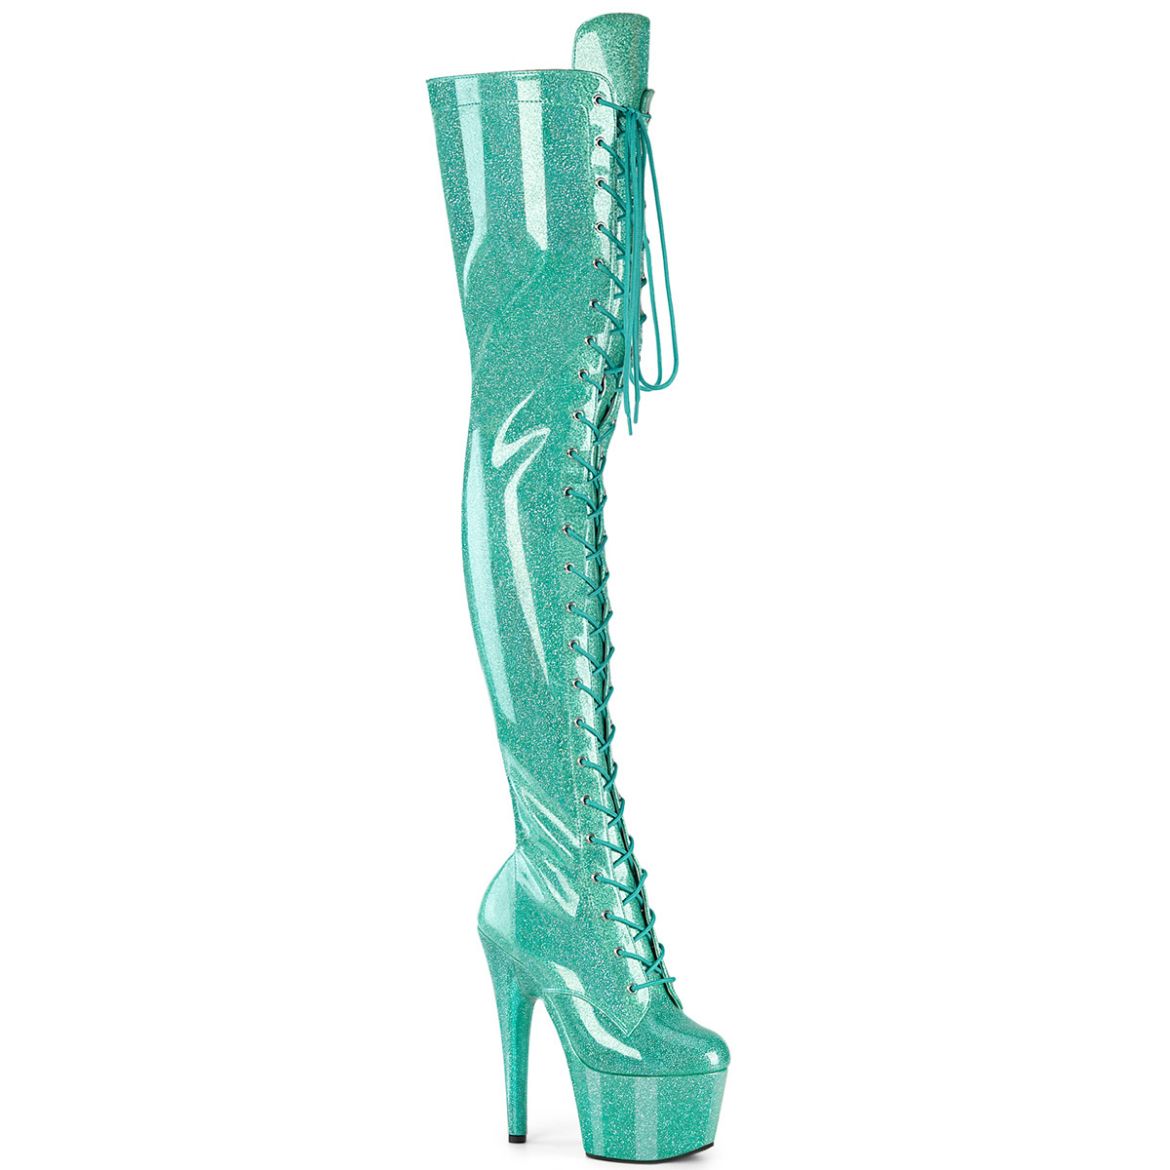 Product image of Pleaser ADORE-3020GP Aqua Glitter Pat/M 7 Inch Heel 2 3/4 Inch PF Lace-Up Stretch Thigh Boot Side Zip